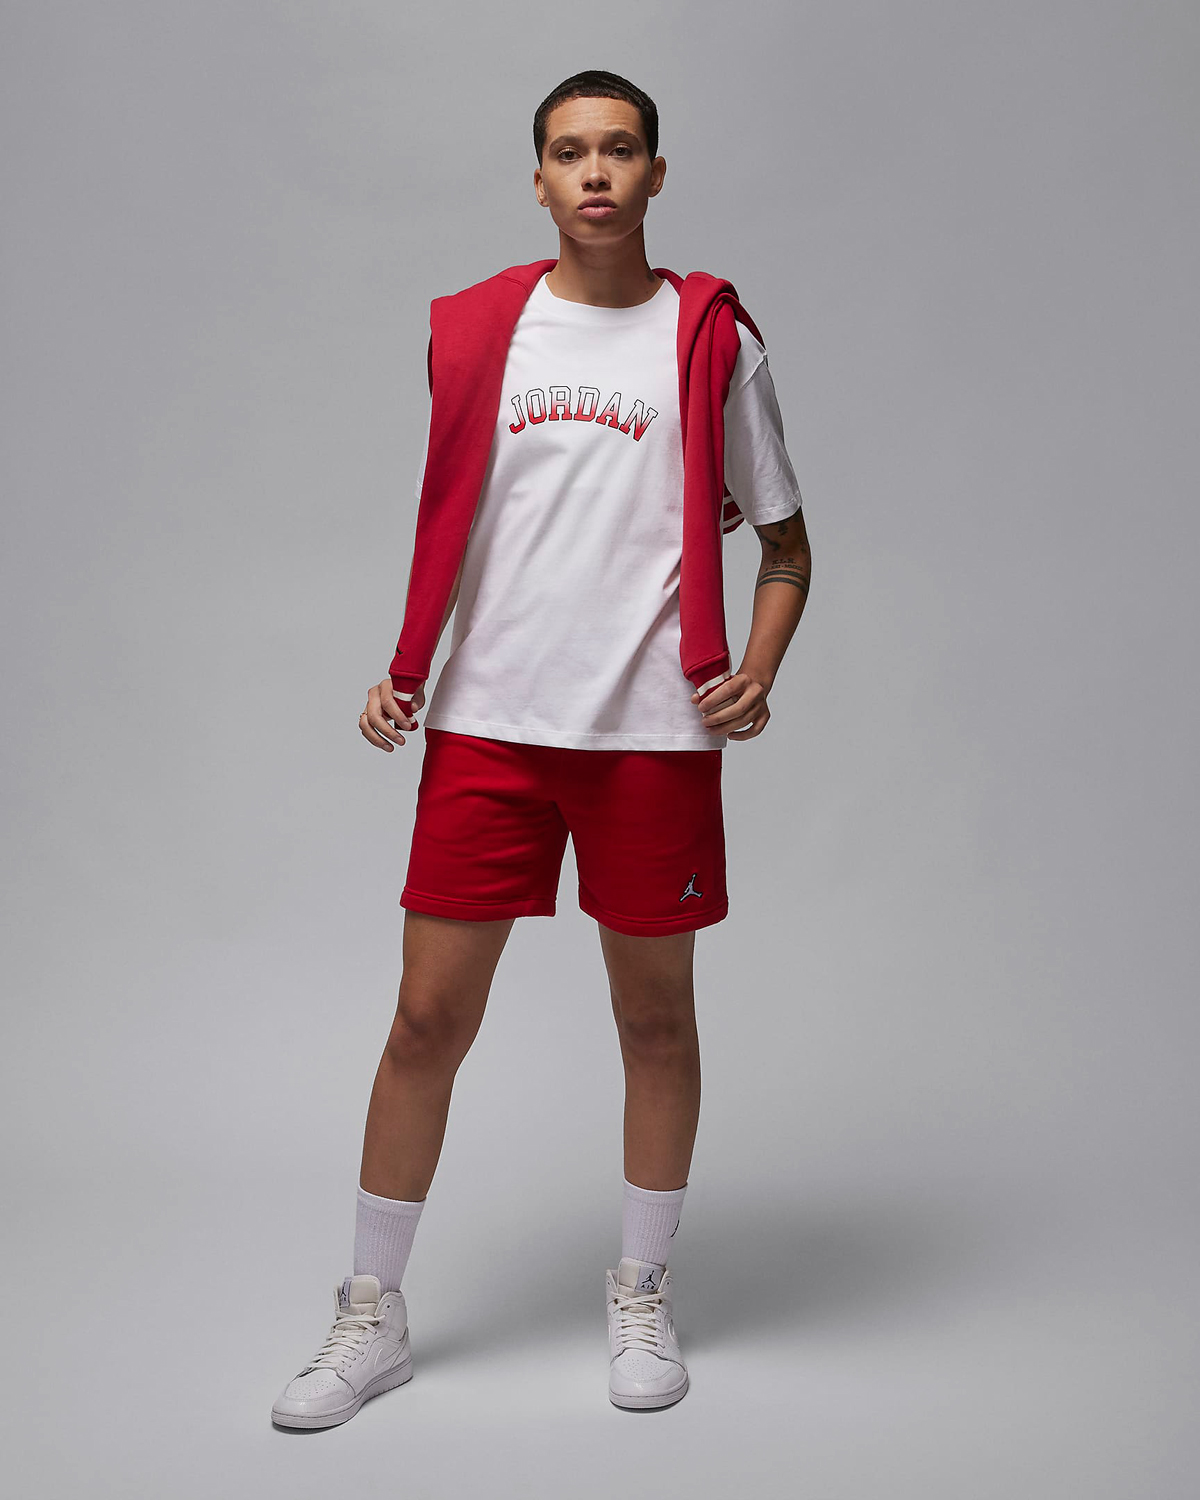 Jordan-Womens-Graphic-T-Shirt-White-Gym-Red-Outfit